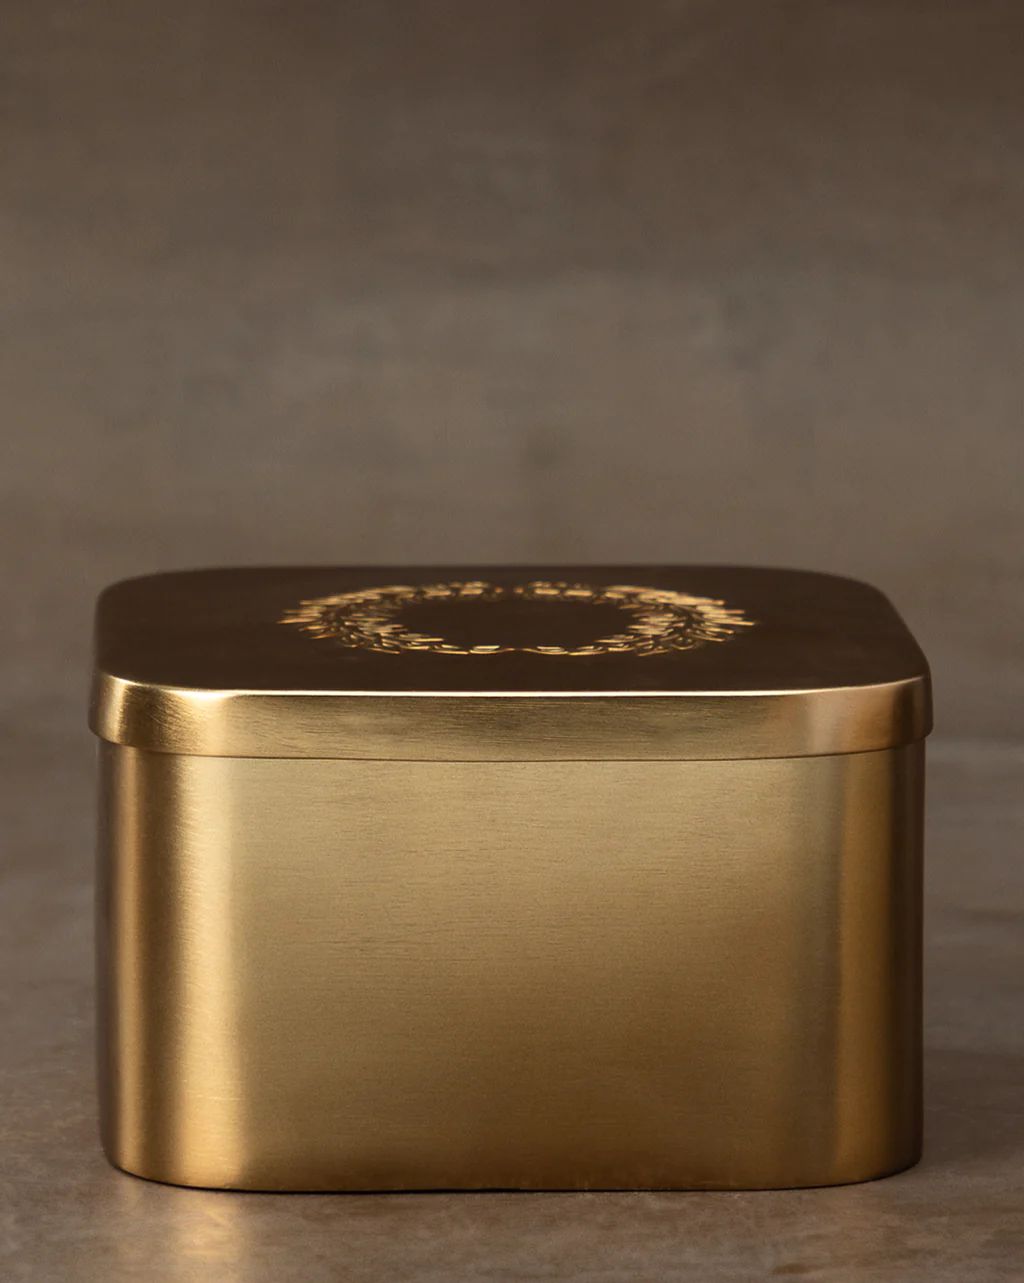 Brass Box with Embossed Wreath | McGee & Co.